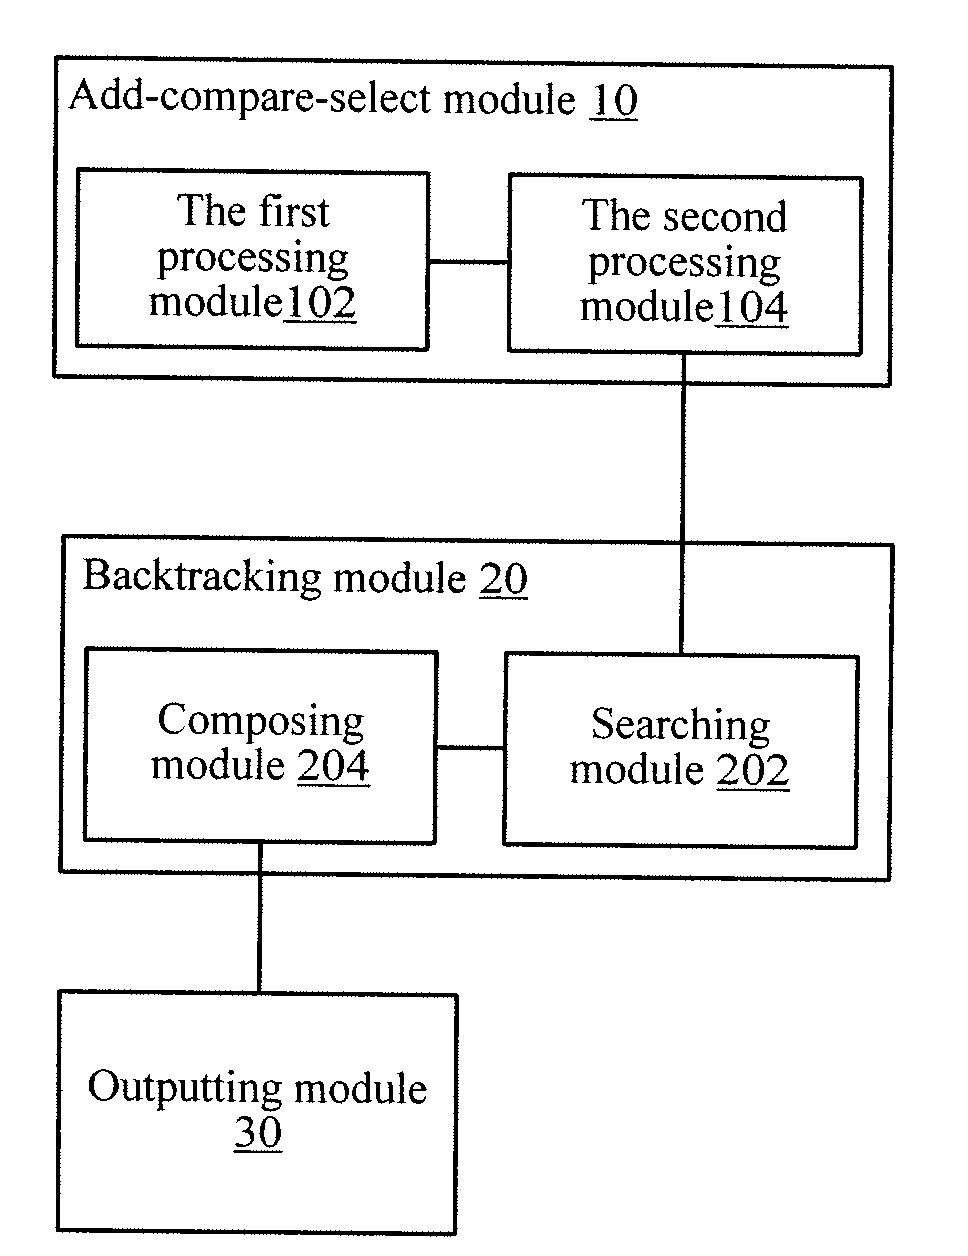 Channel decoding method and tail biting convolutional decoder